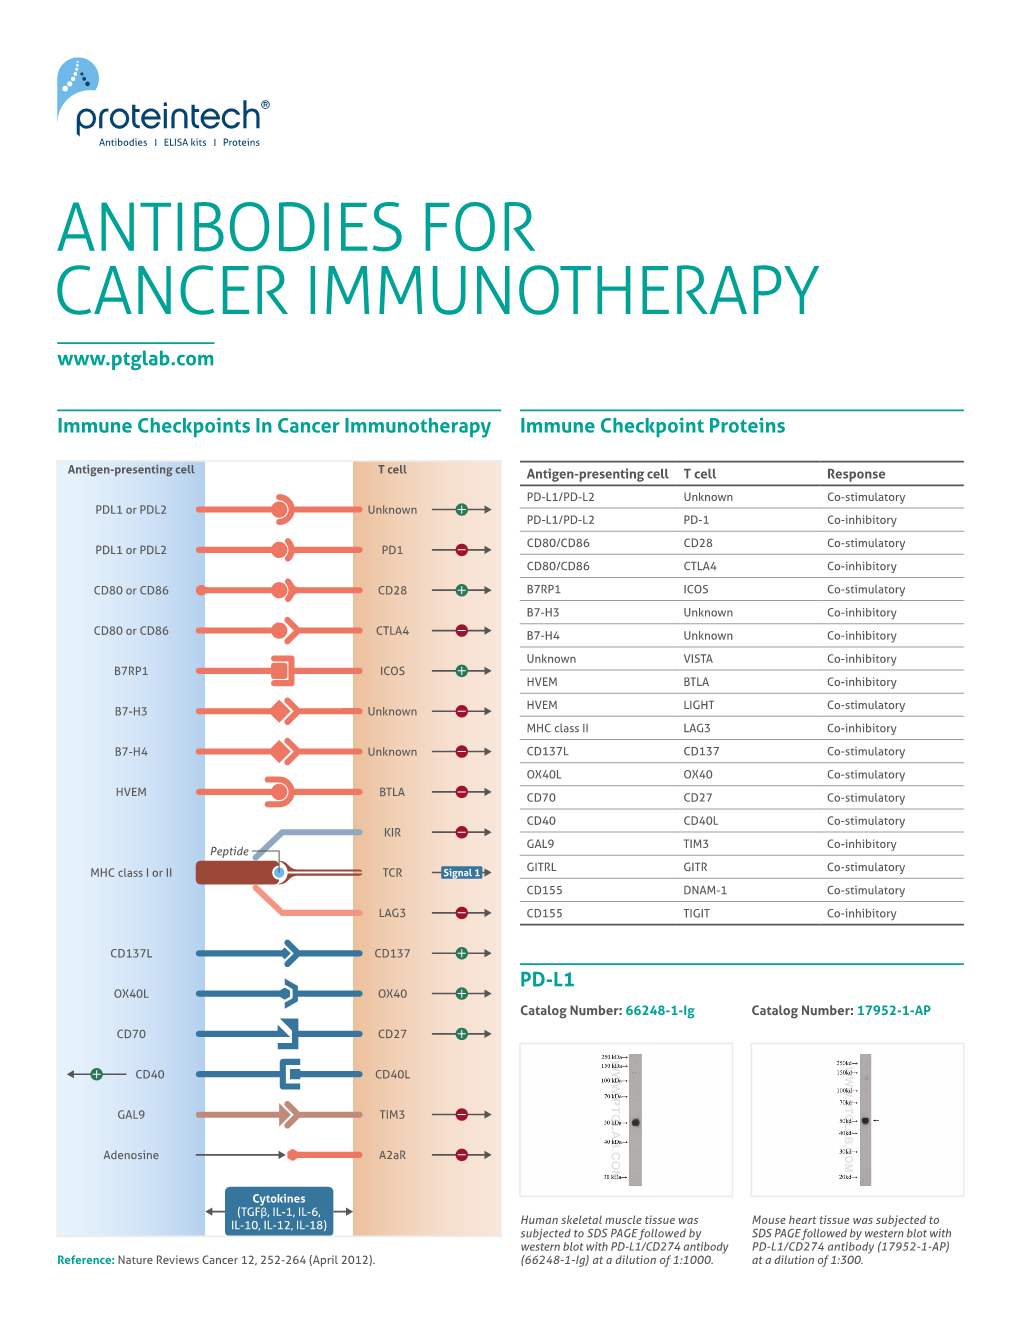 Antibodies for Cancer Immunotherapy